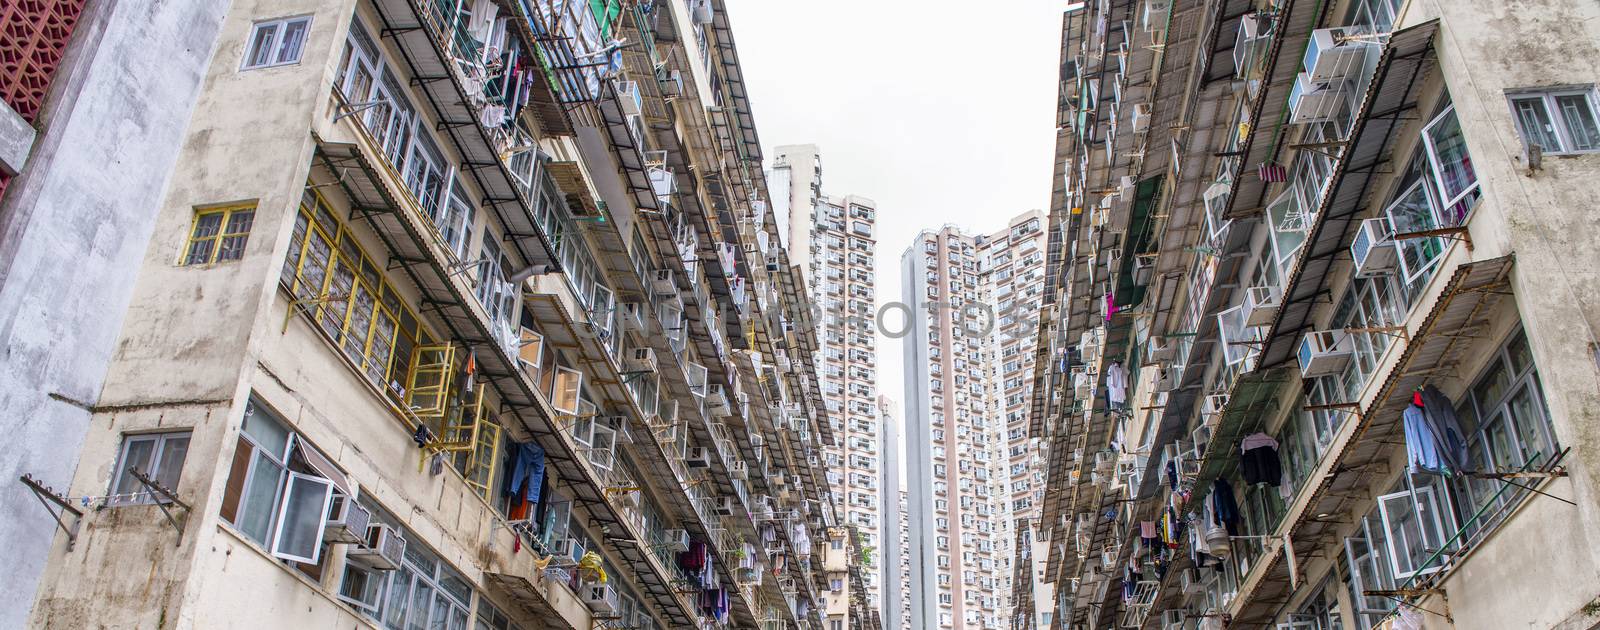 Run Down Living Quarters in Hong Kong. Crowded Residential Apart by jovannig